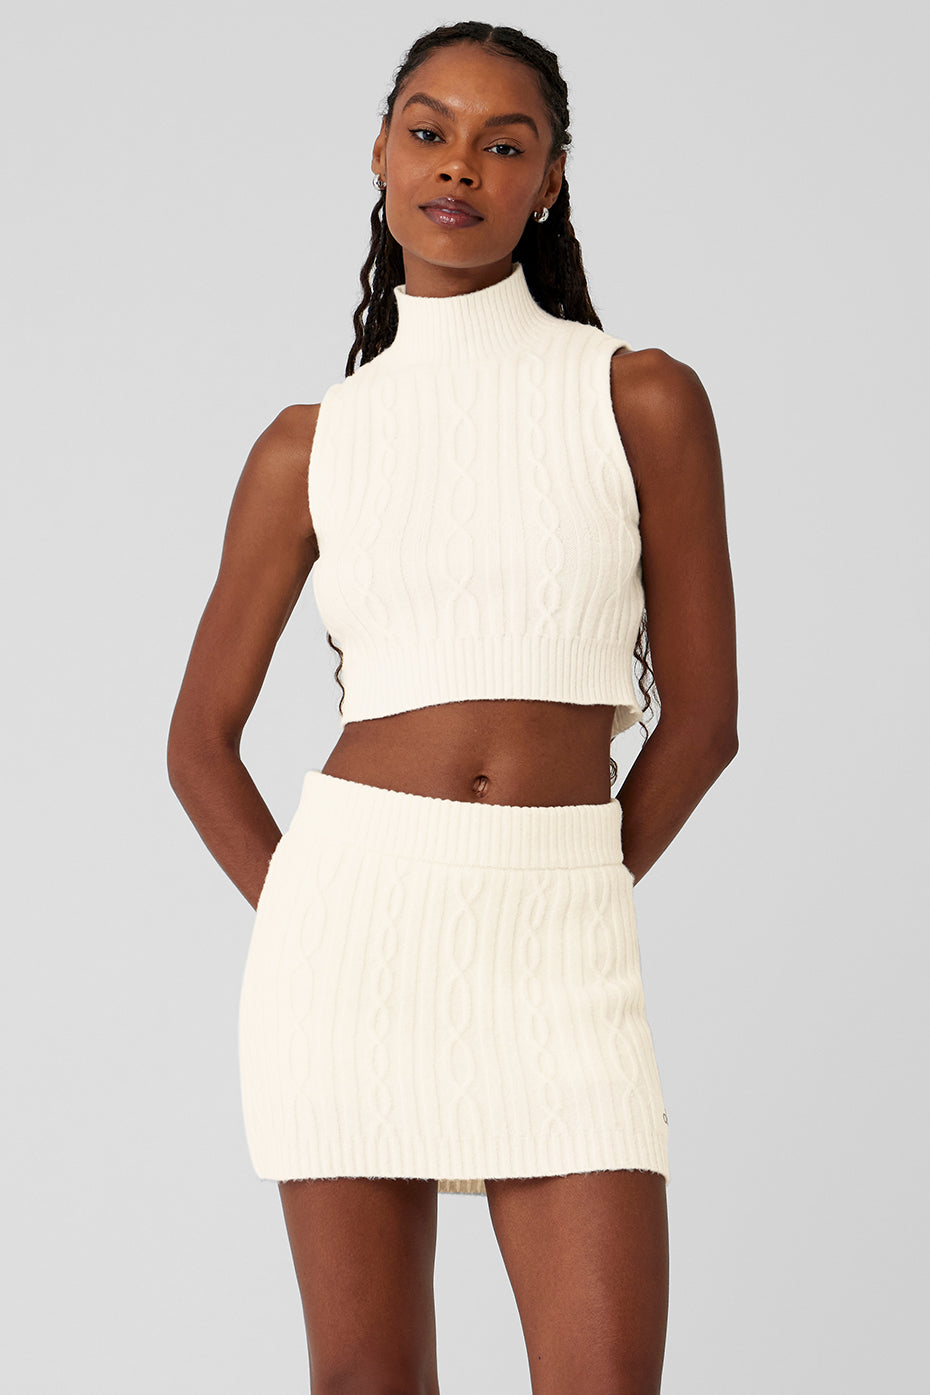 Cable Knit Winter Bliss Mock Neck Tank - Ivory